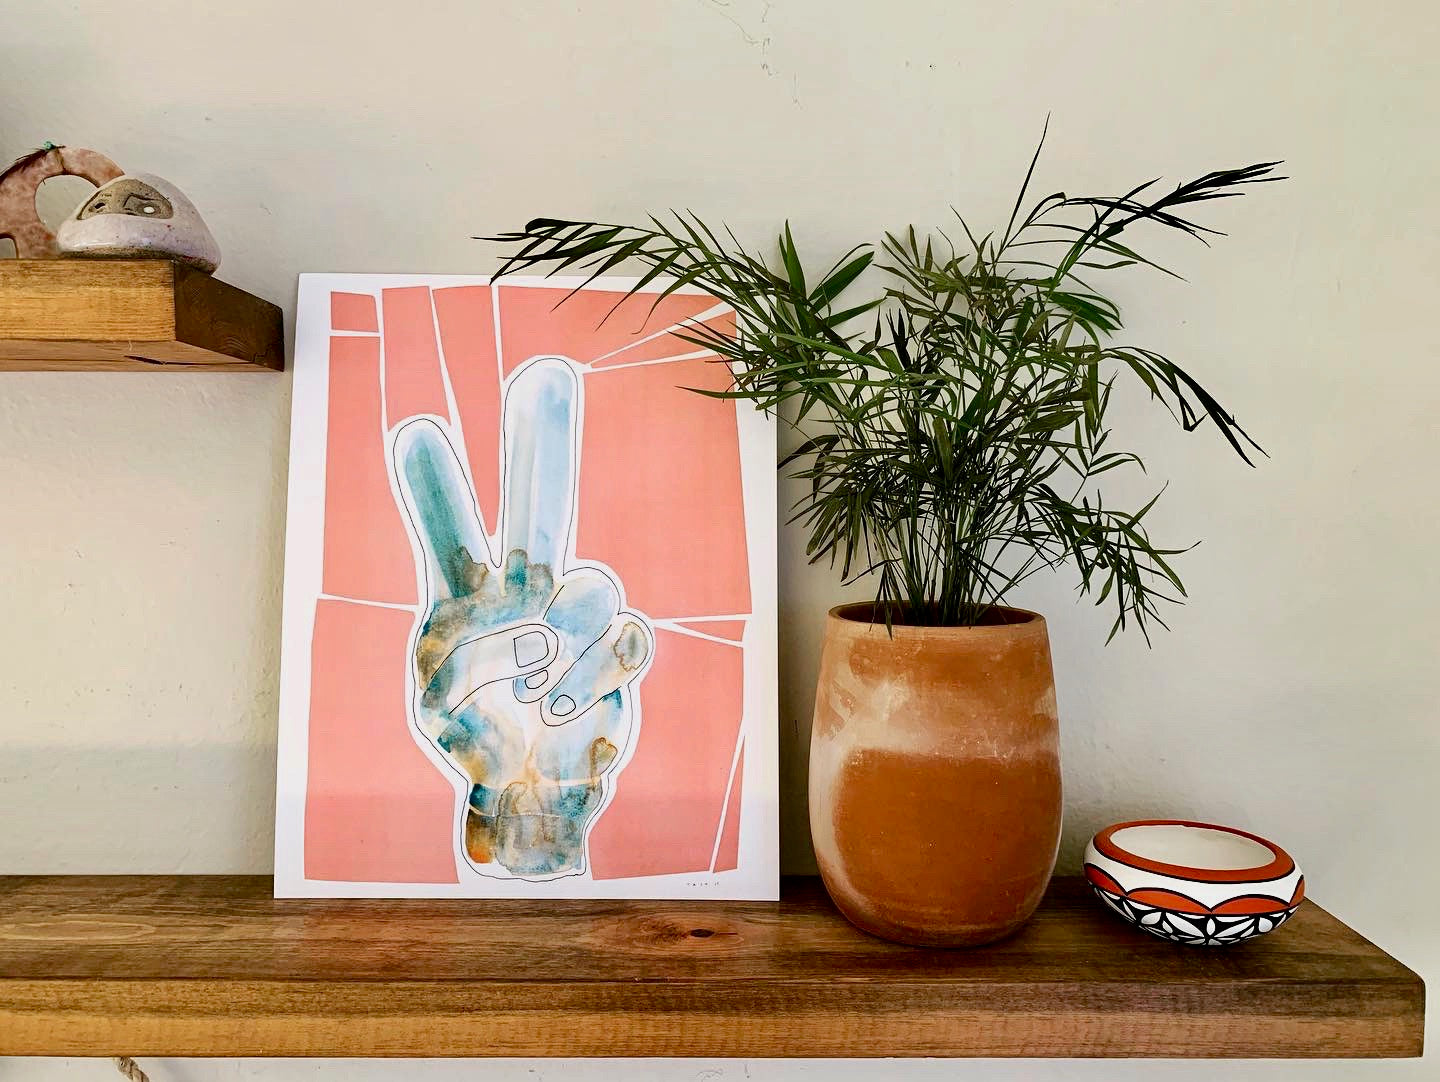 Print of an original watercolor by local Encinitas, California artist, Tait Hawes. Measures 11" x 17" and features peace fingers in peaches and blue tones.